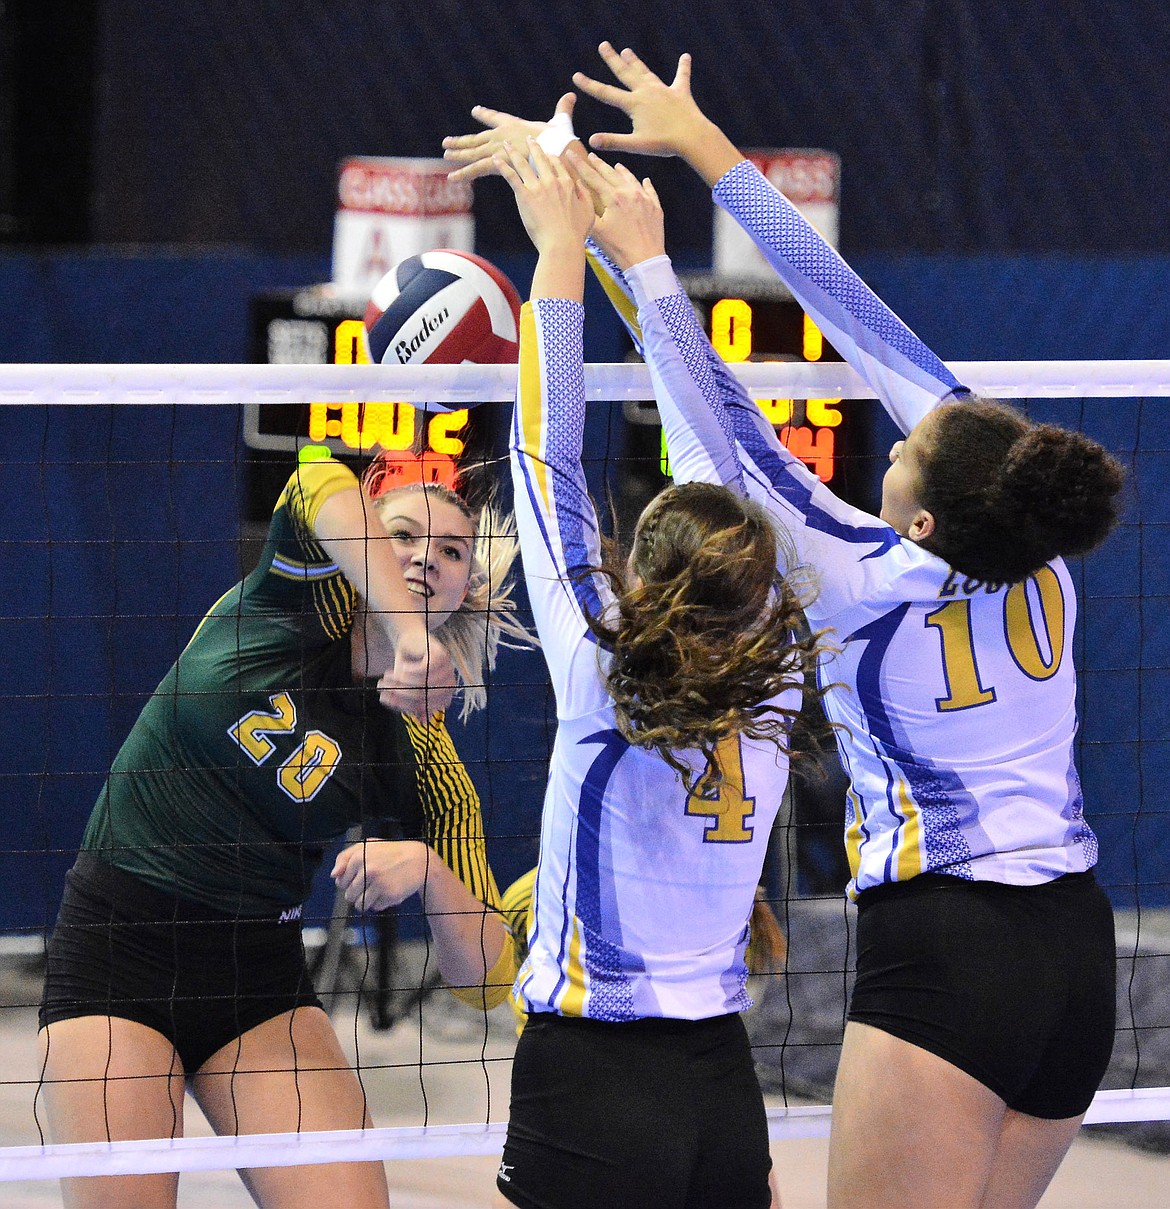 Jayden Winslow and Mehki Sykes block Cailyn Ross of Whitefish. (Jeff Doorn photo)